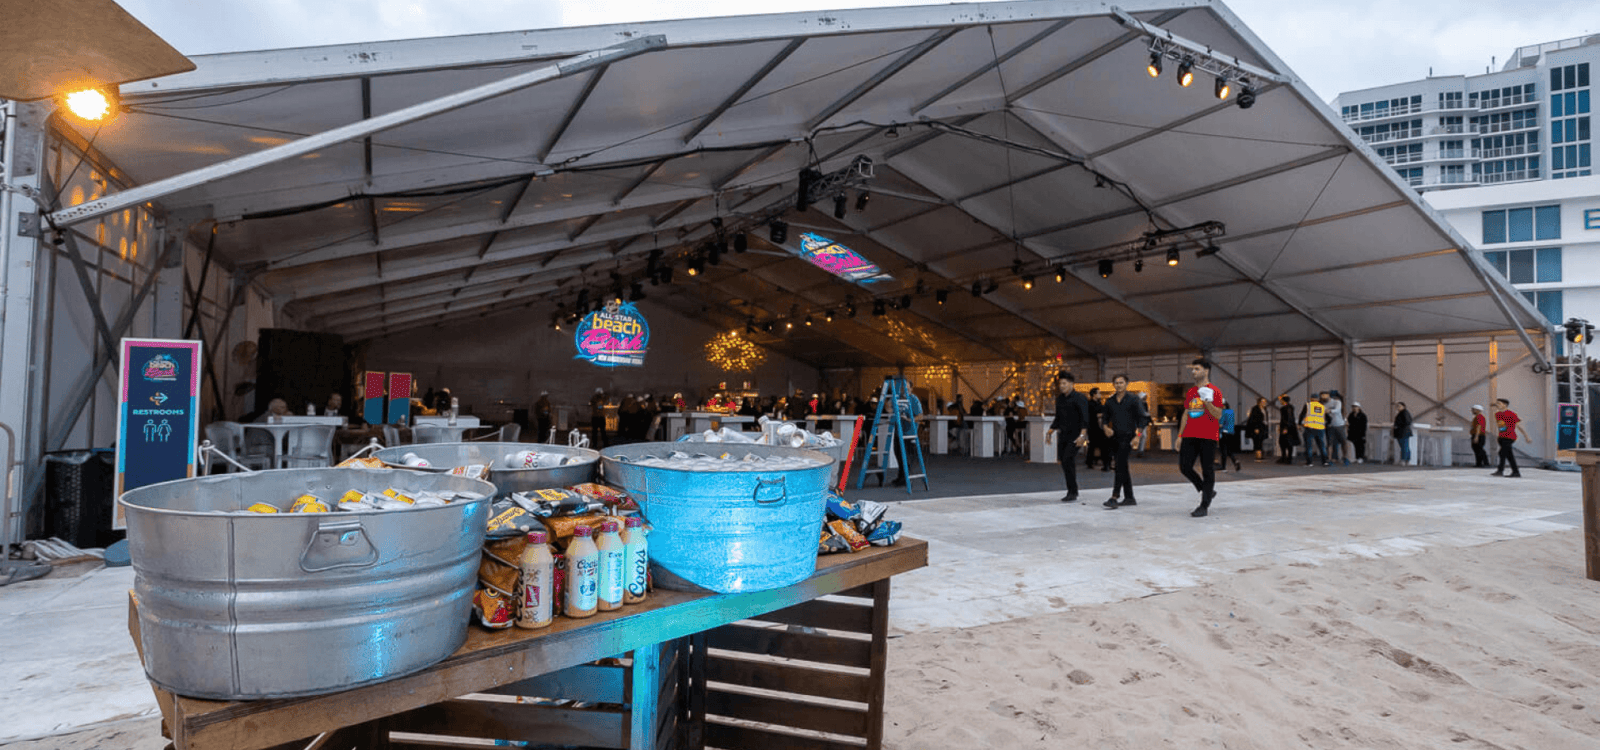 Eventure - NHL All Star 2023 tent with food stands and open bar on beach